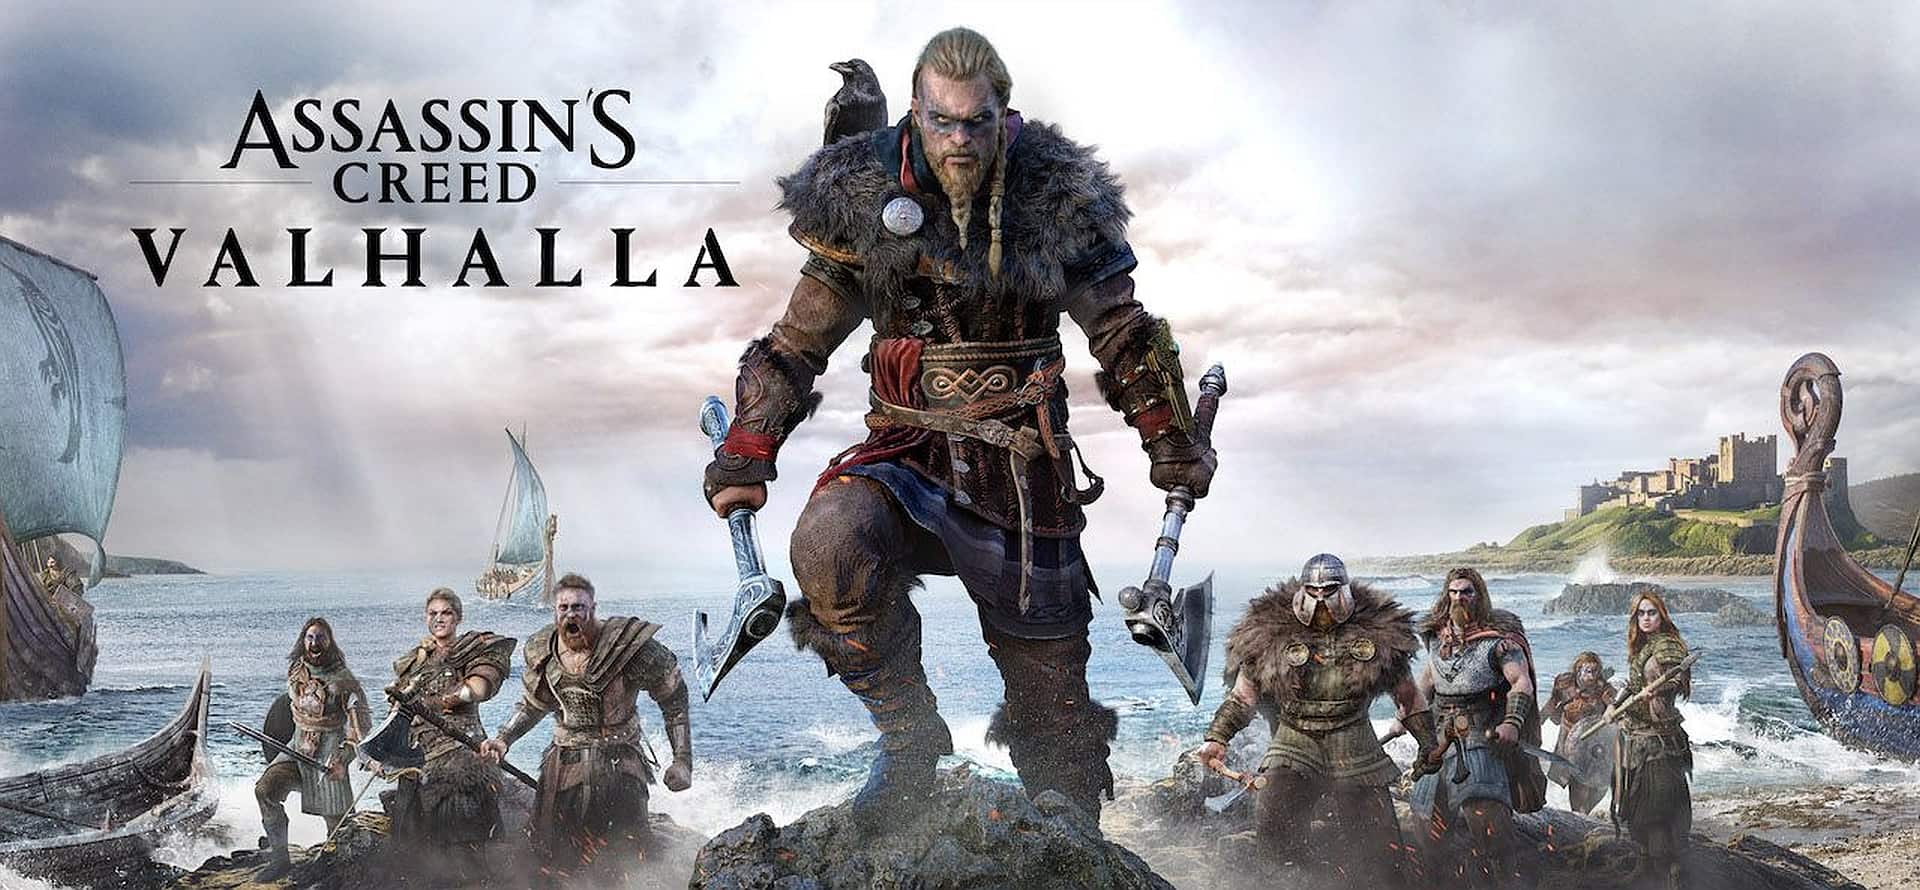 assassin's creed valhalla review